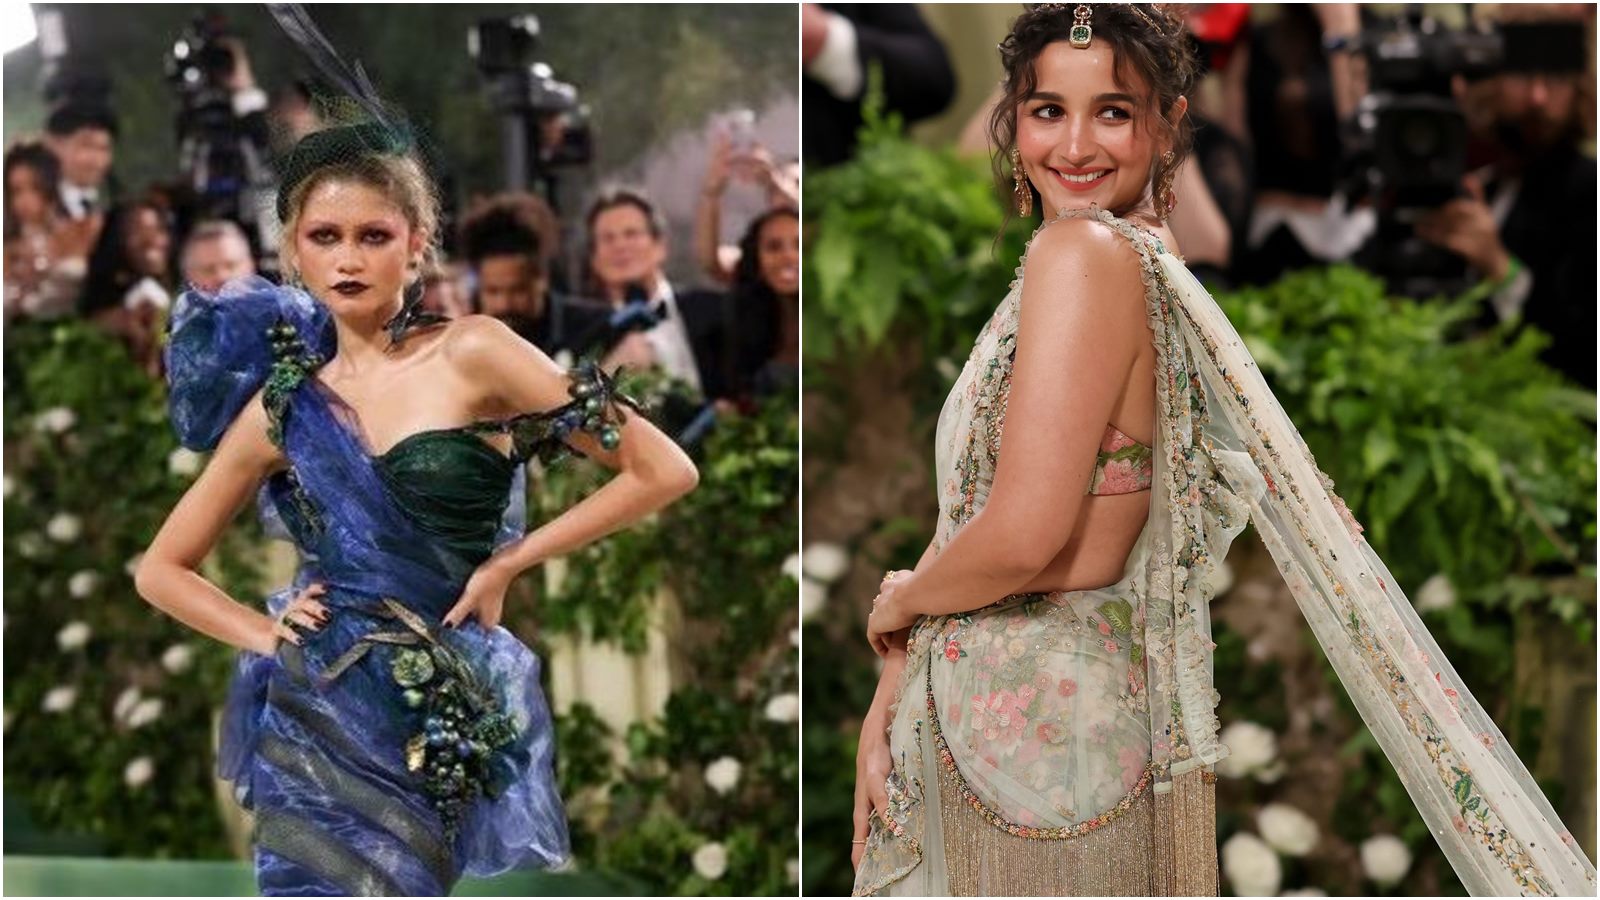 How the garden of time that inspired the Met Gala dress code unfolded in real time amid protests against the Gaza war |  What is news